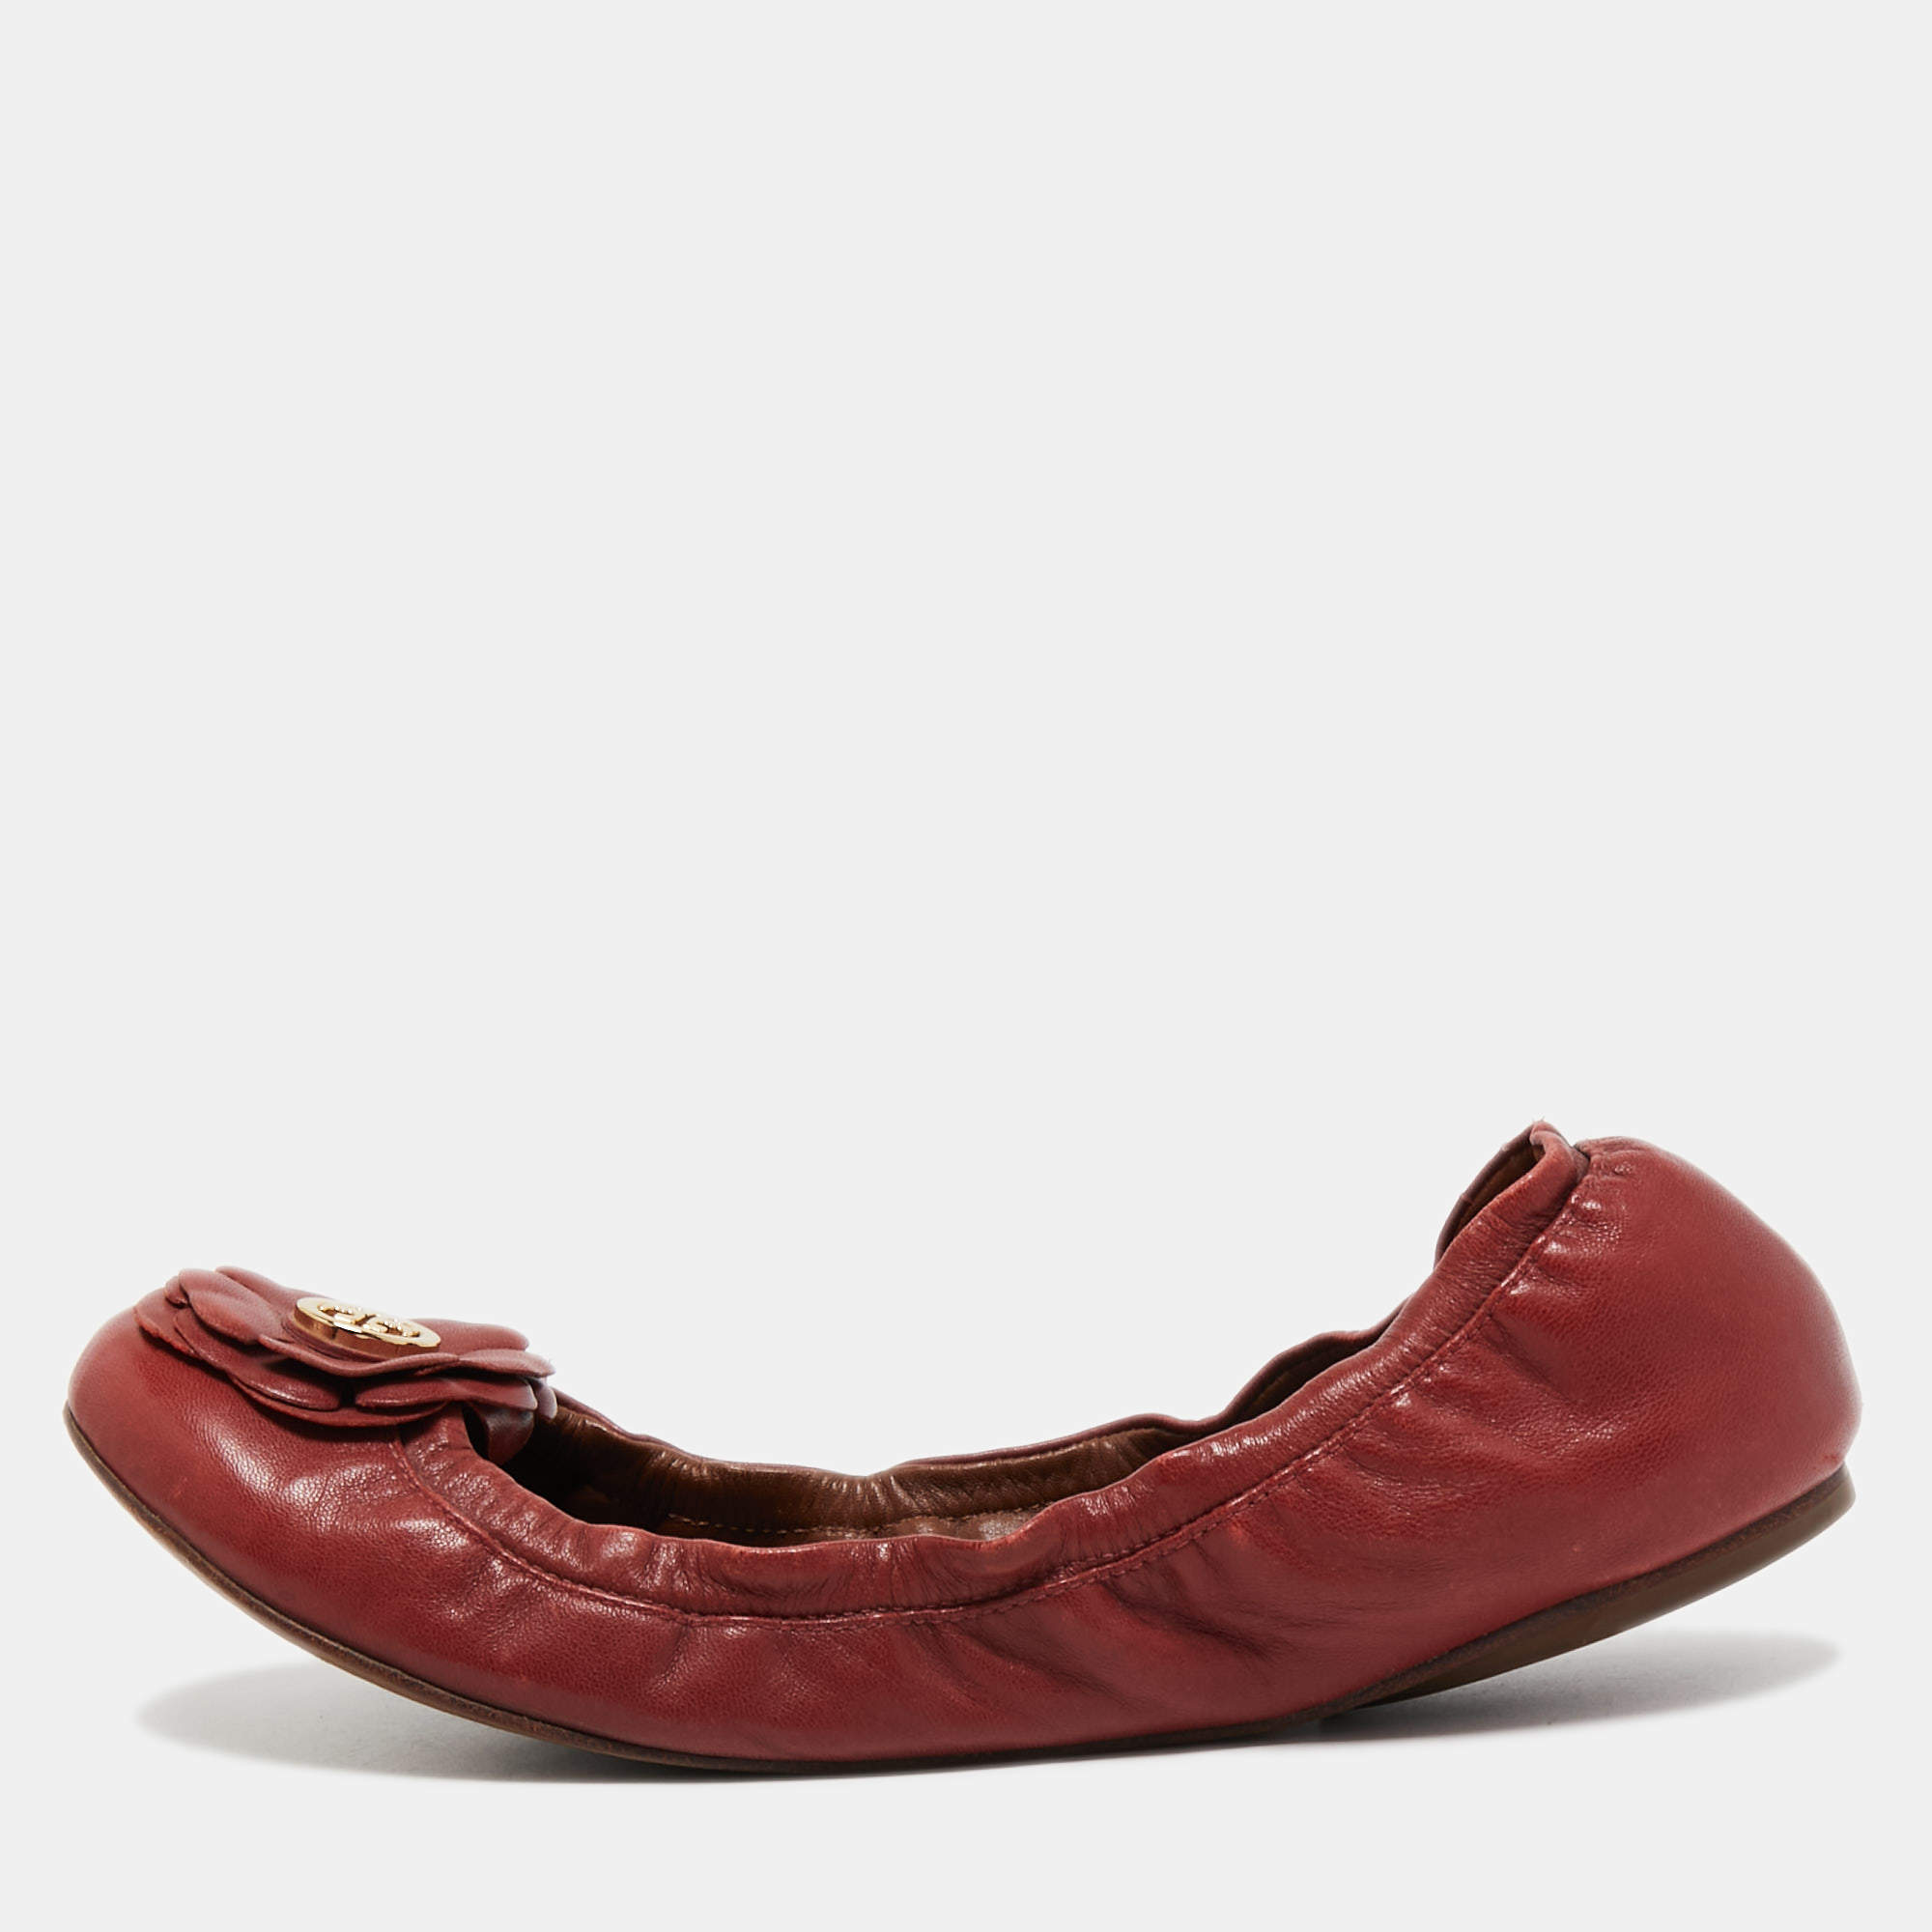 Tory Burch Red Leather Shelby Scrunch Ballet Flats Size 40 Tory Burch | TLC